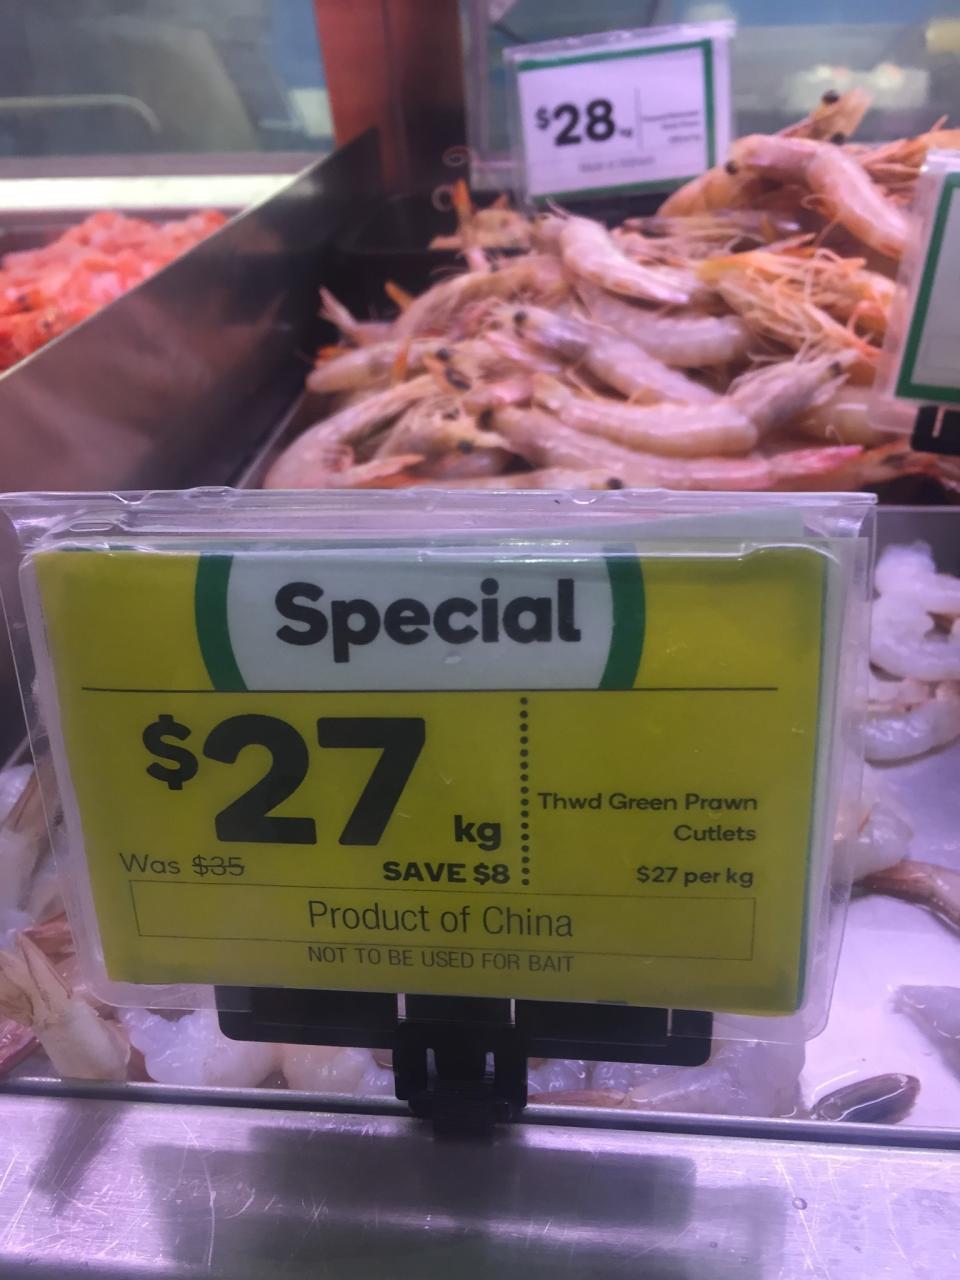 Customers were outraged by the sign which indicates the prawns were imported. Source: Facebook